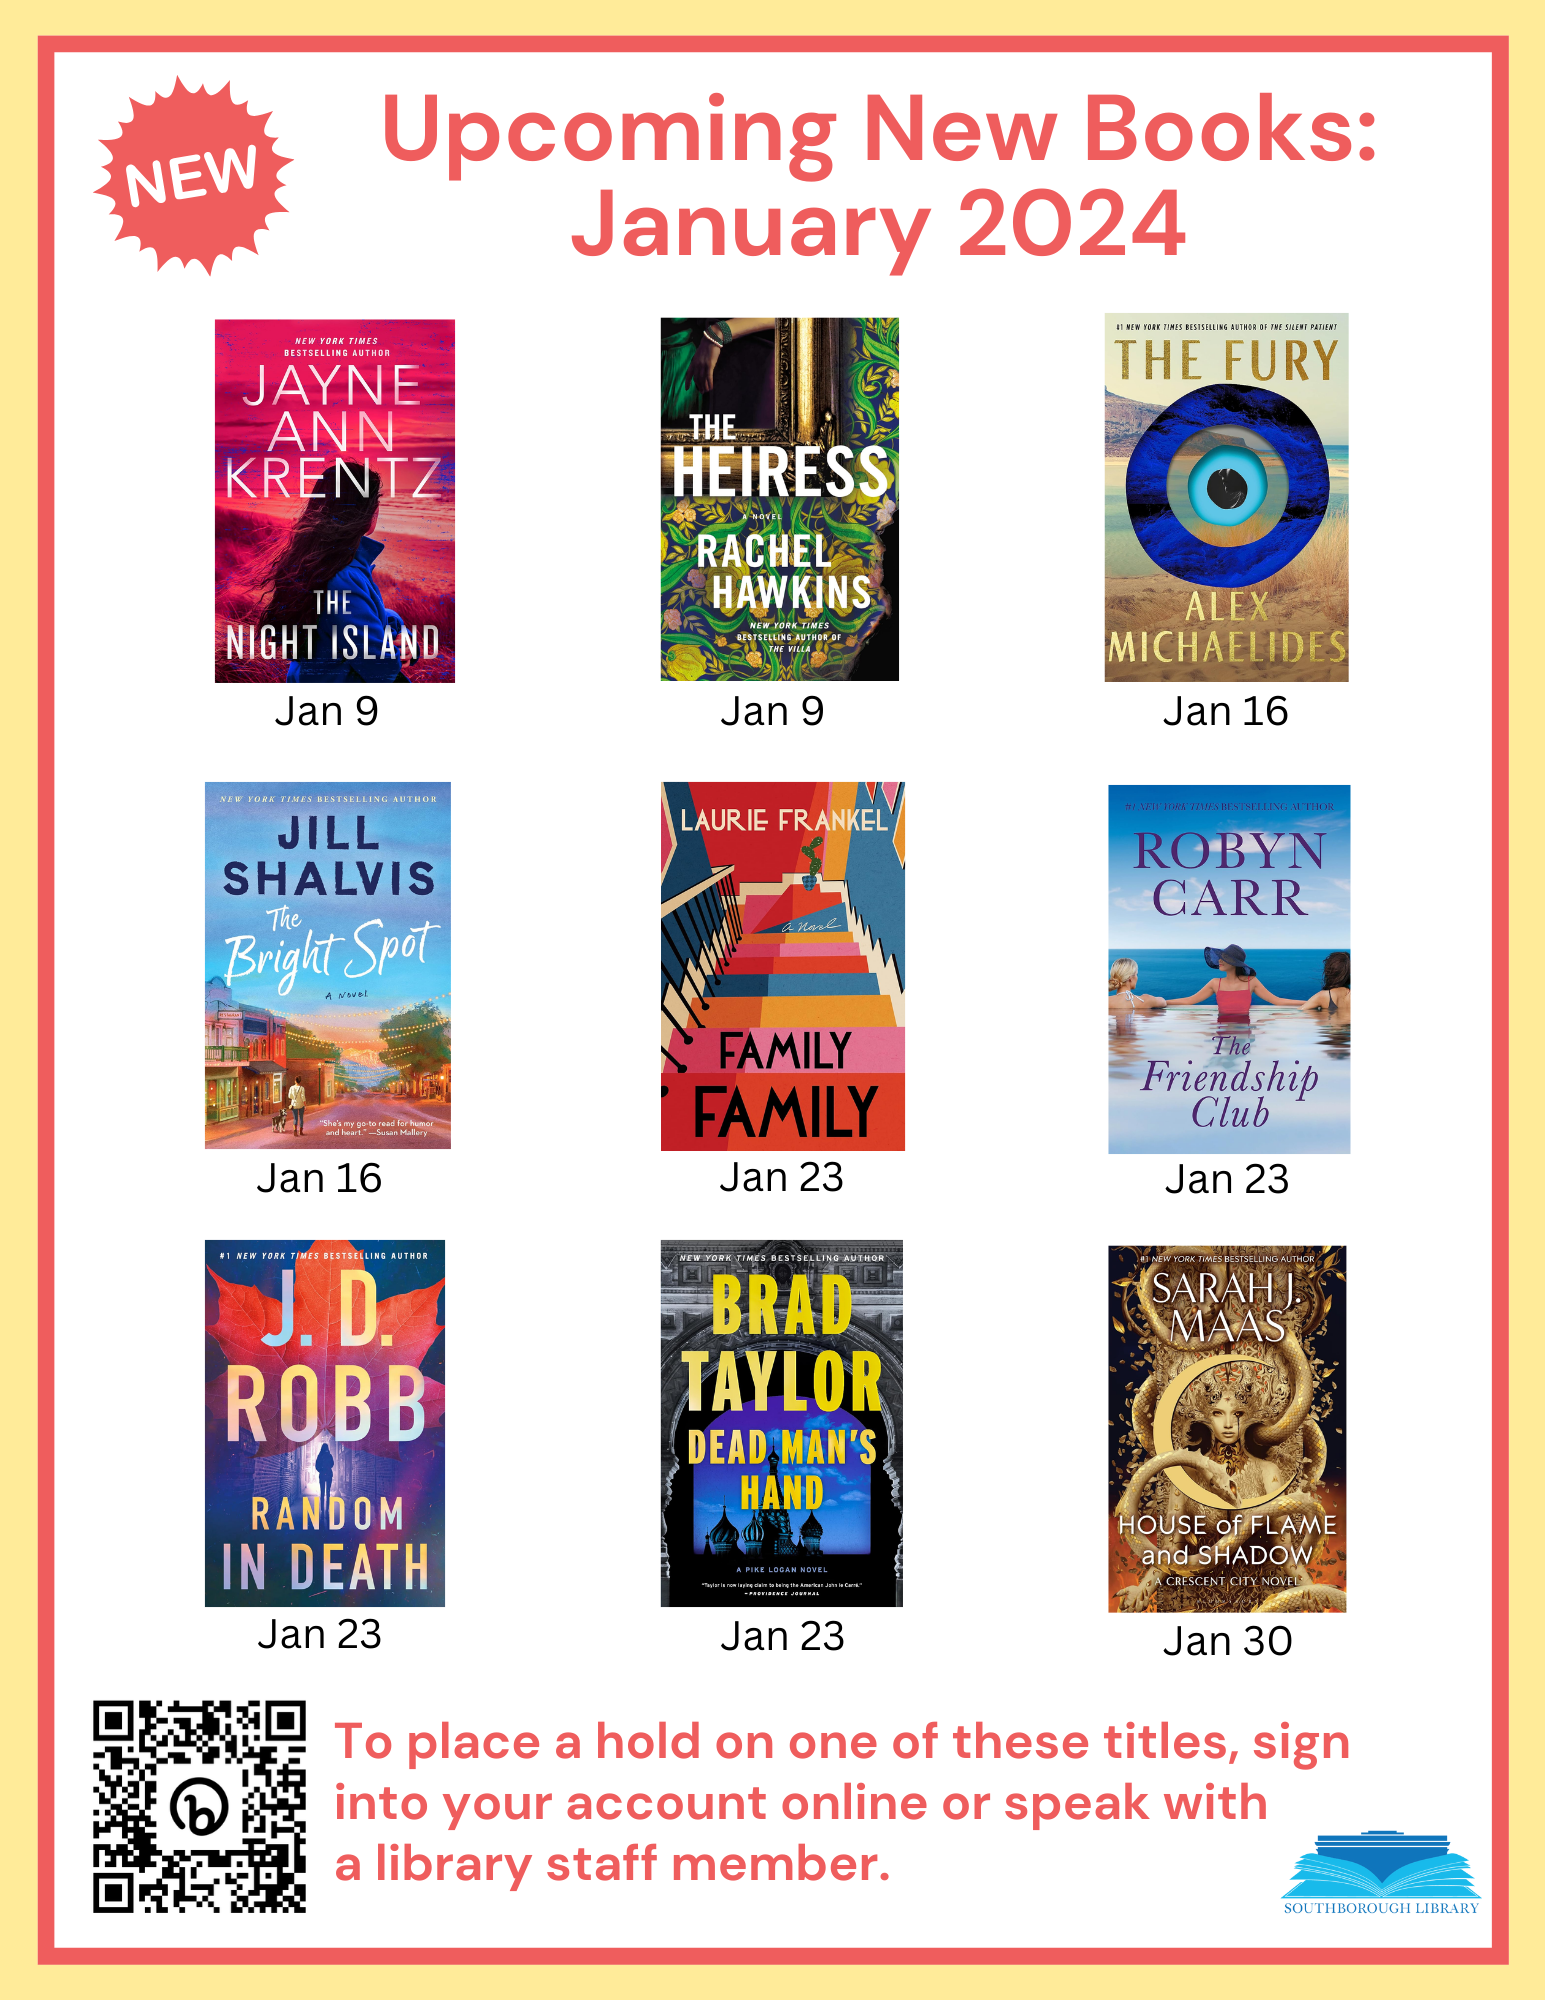 Upcoming New Books January 2024 flyer